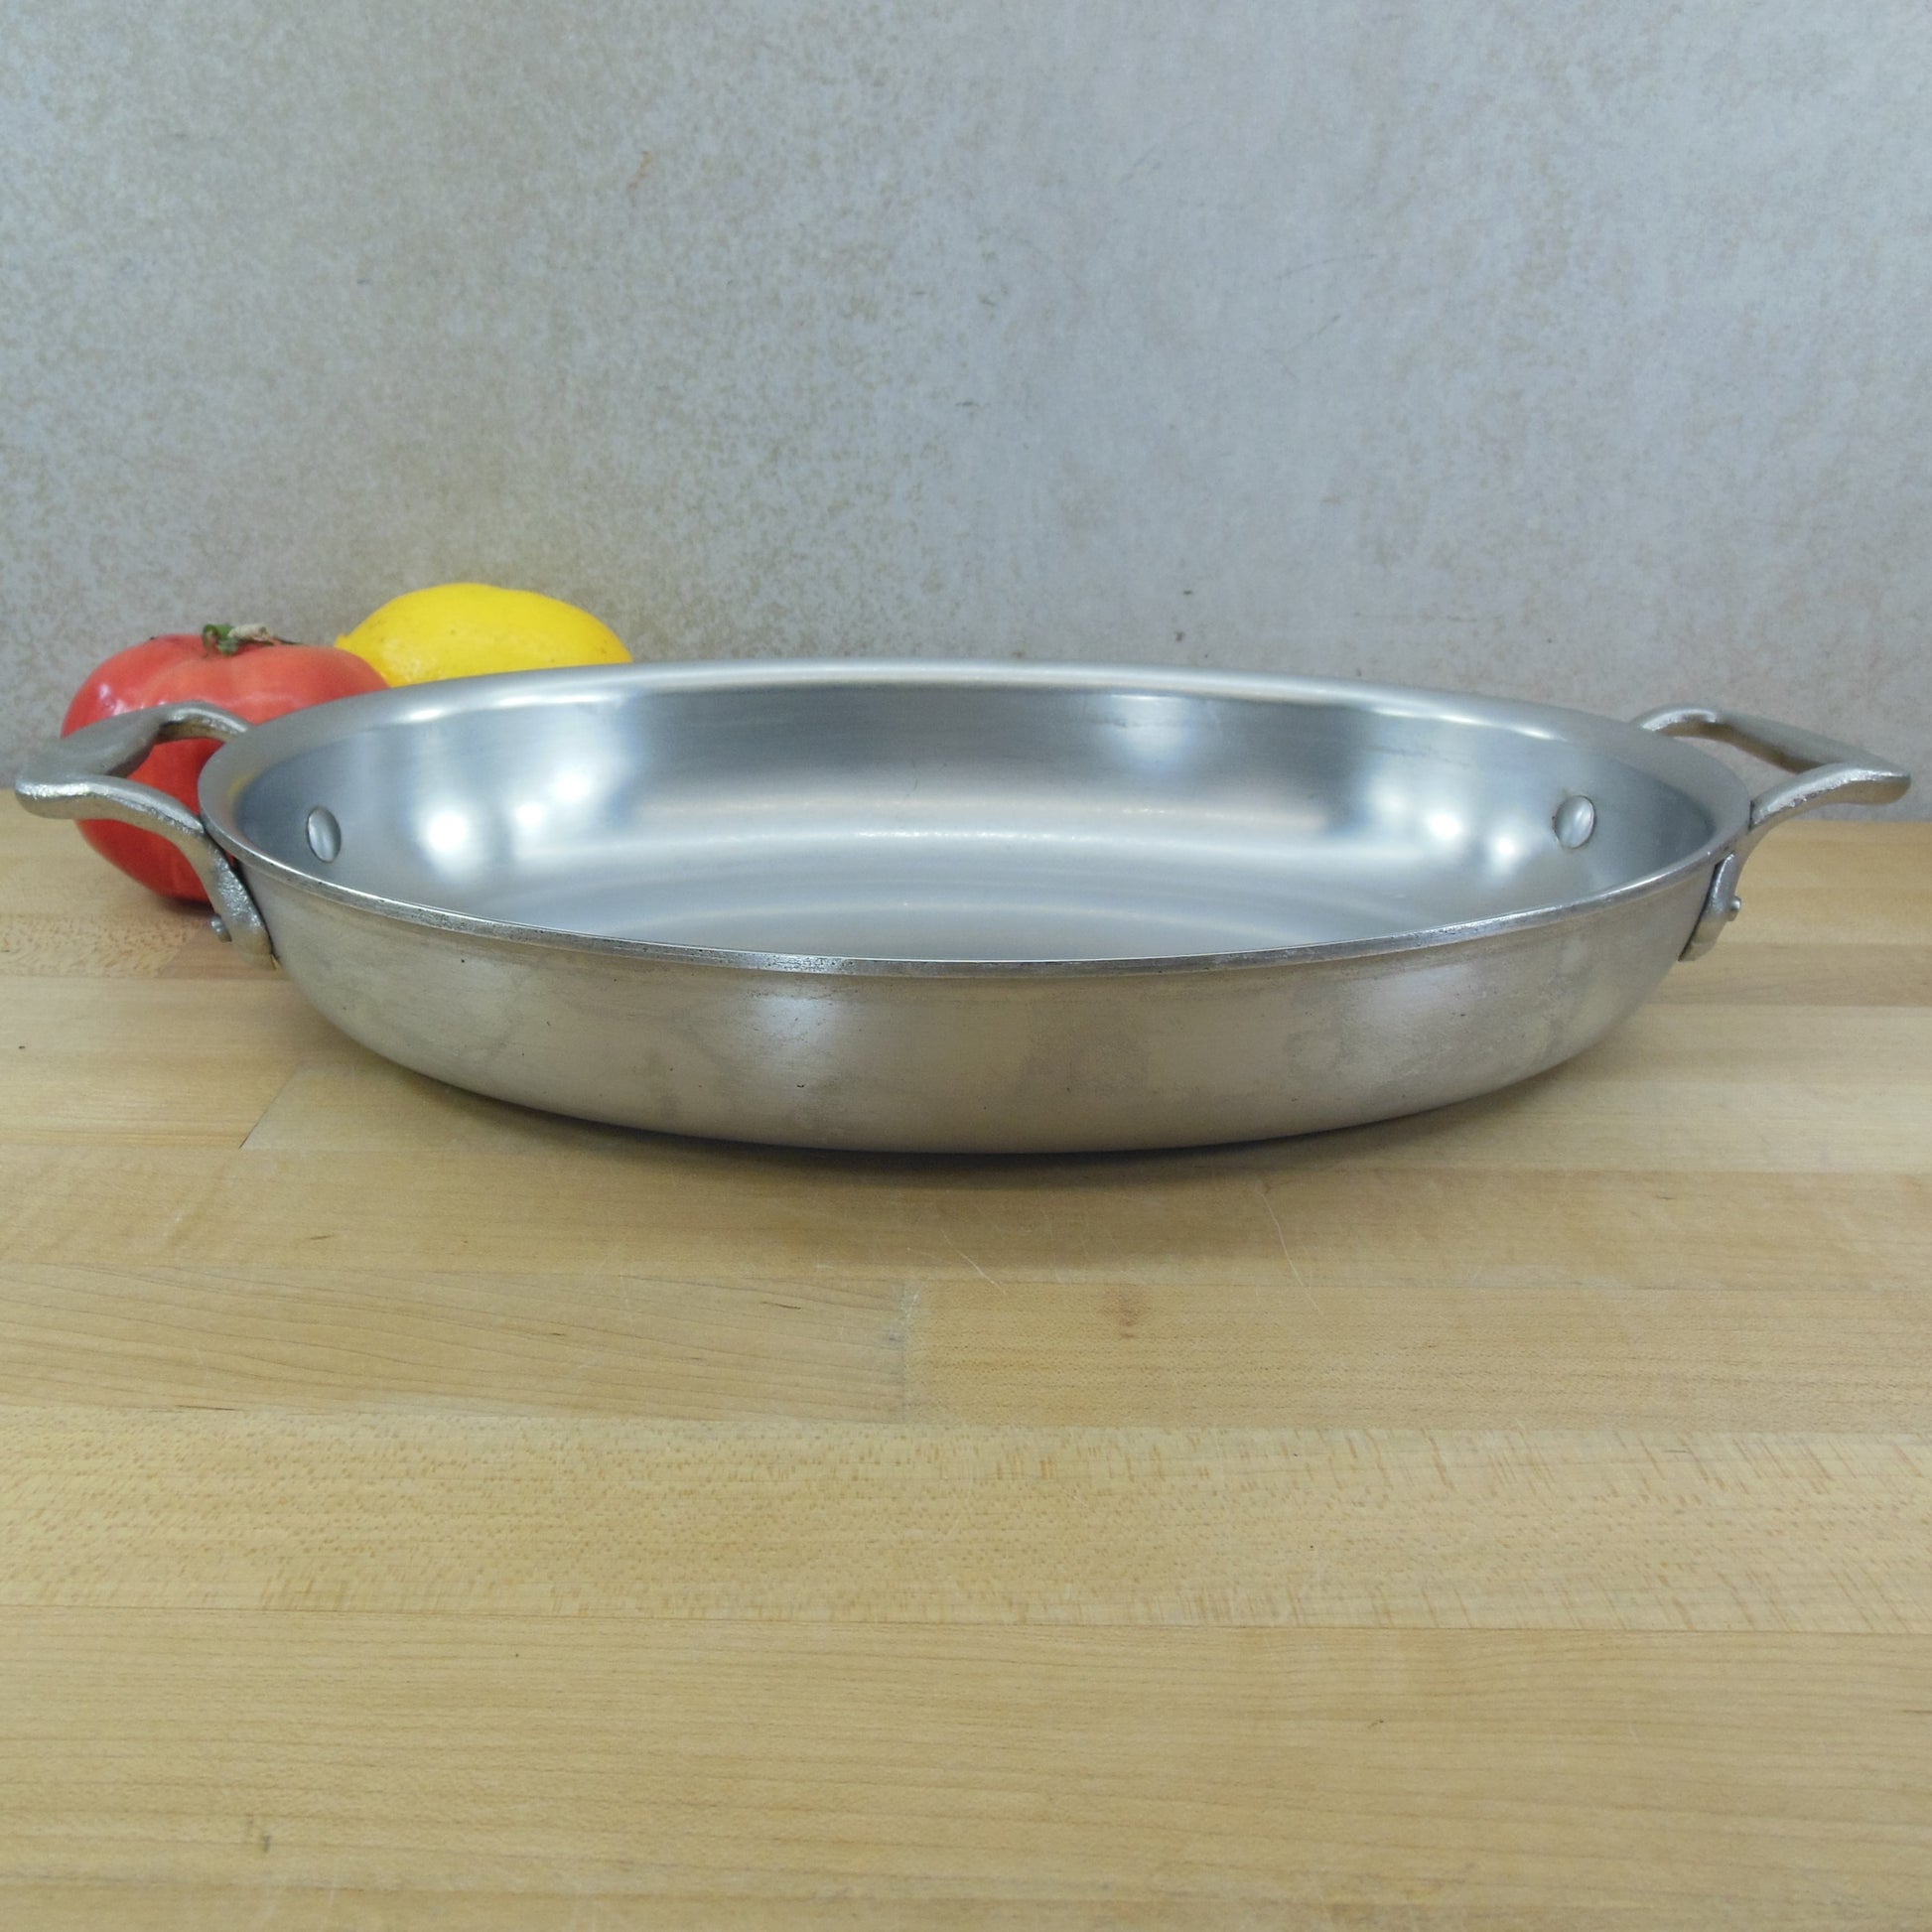 All-Clad Style Stainless Aluminum Oval Au Gratin Pan 9"x12"